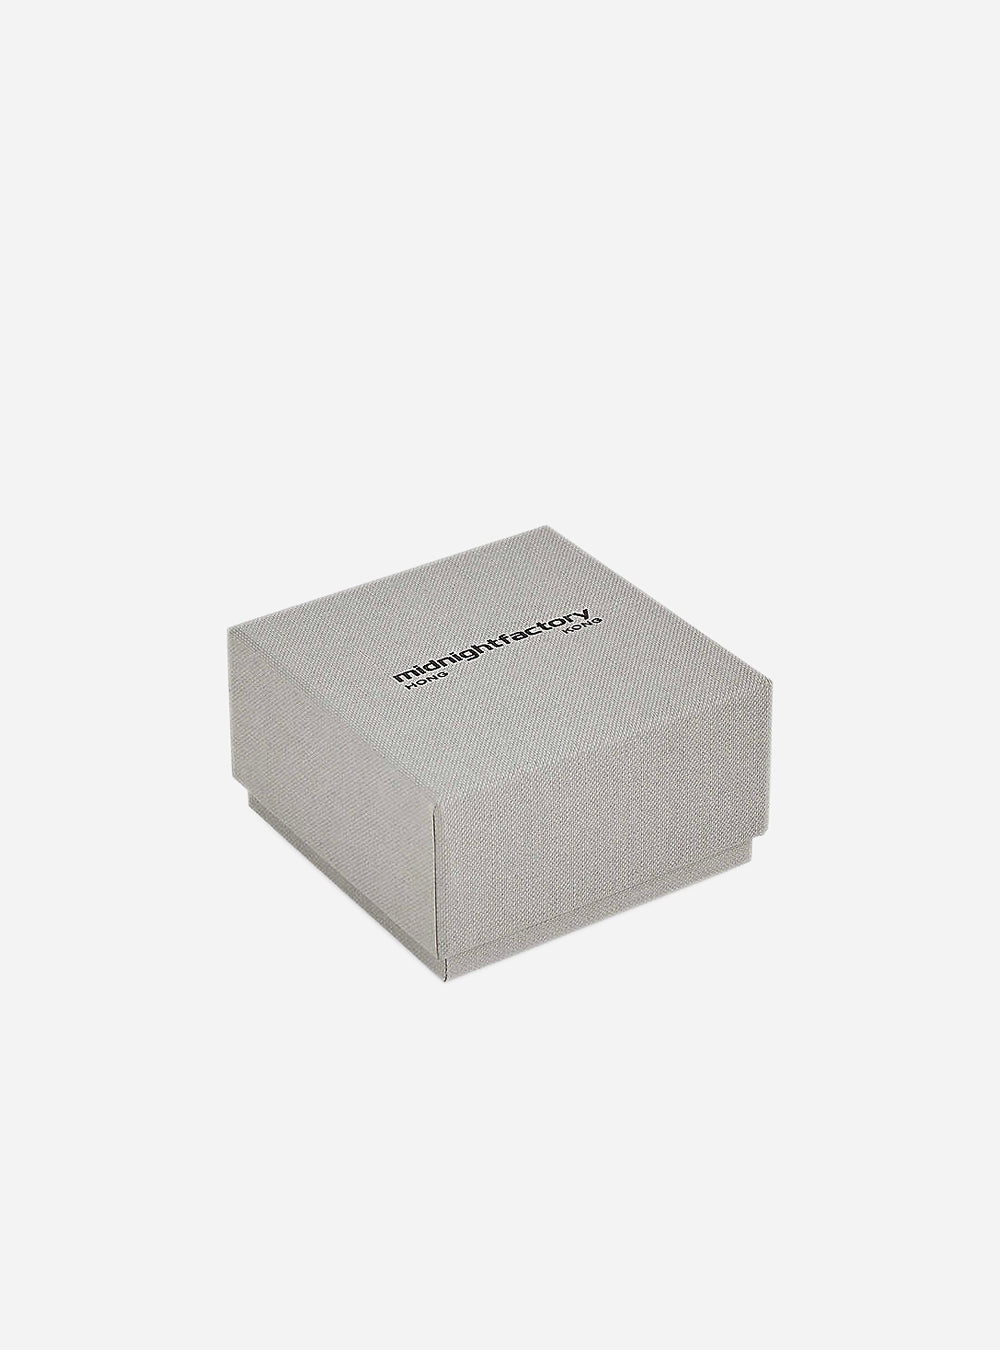 A small grey box with the MIDNIGHTFACTORY logo on it.